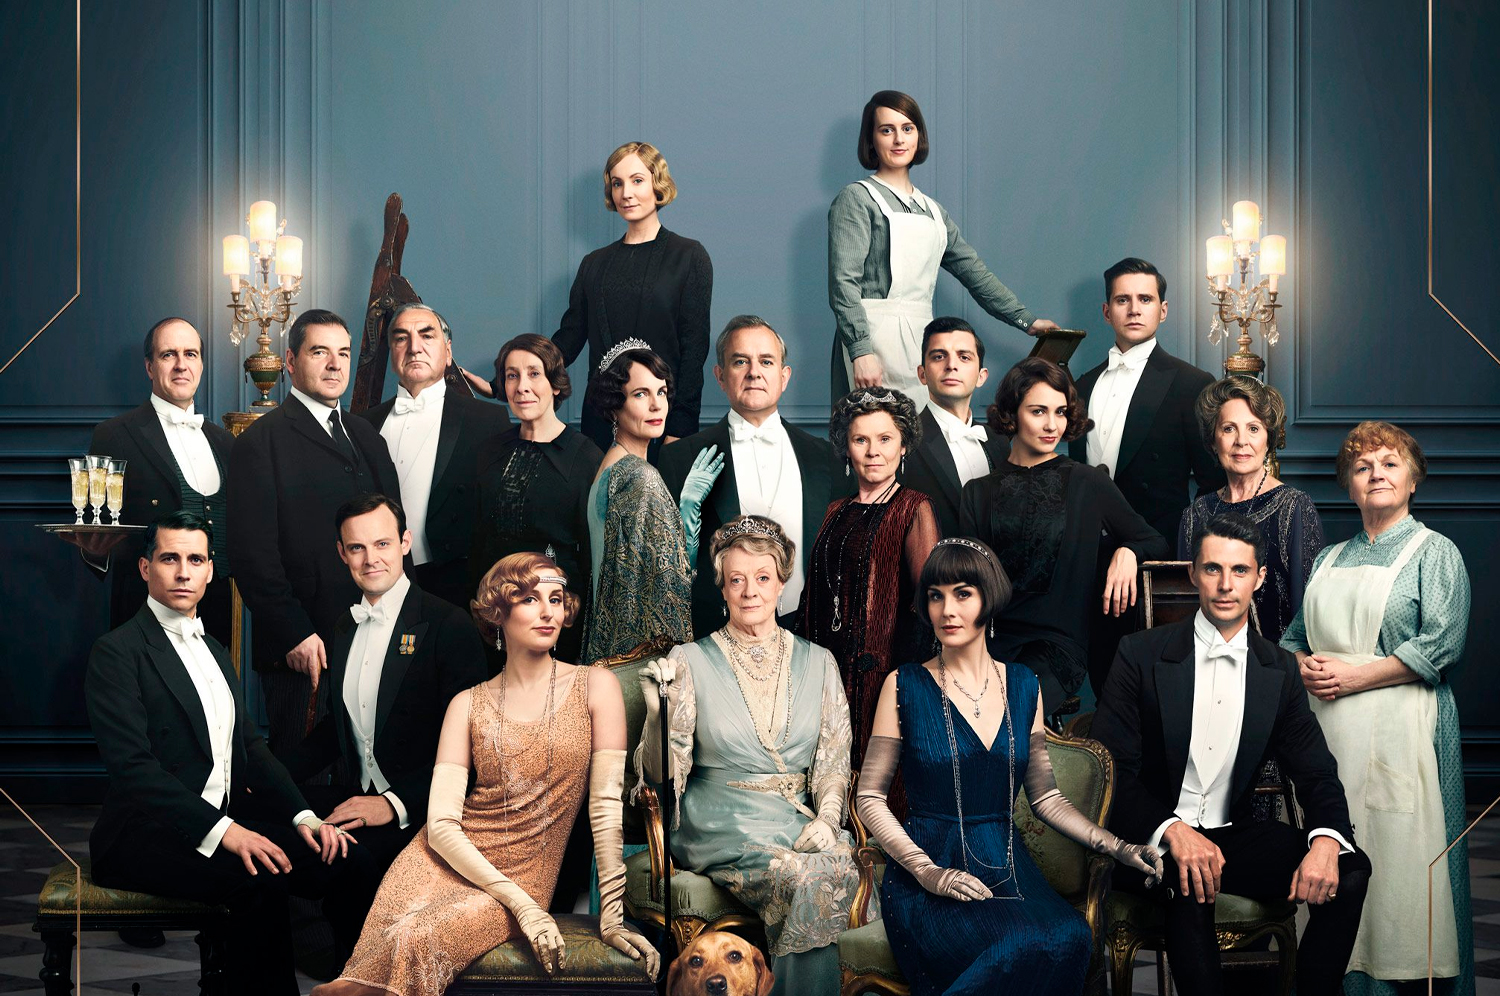 Downton Abbey: Find out why you should watch this movie on Netflix (even if you haven't seen the series)